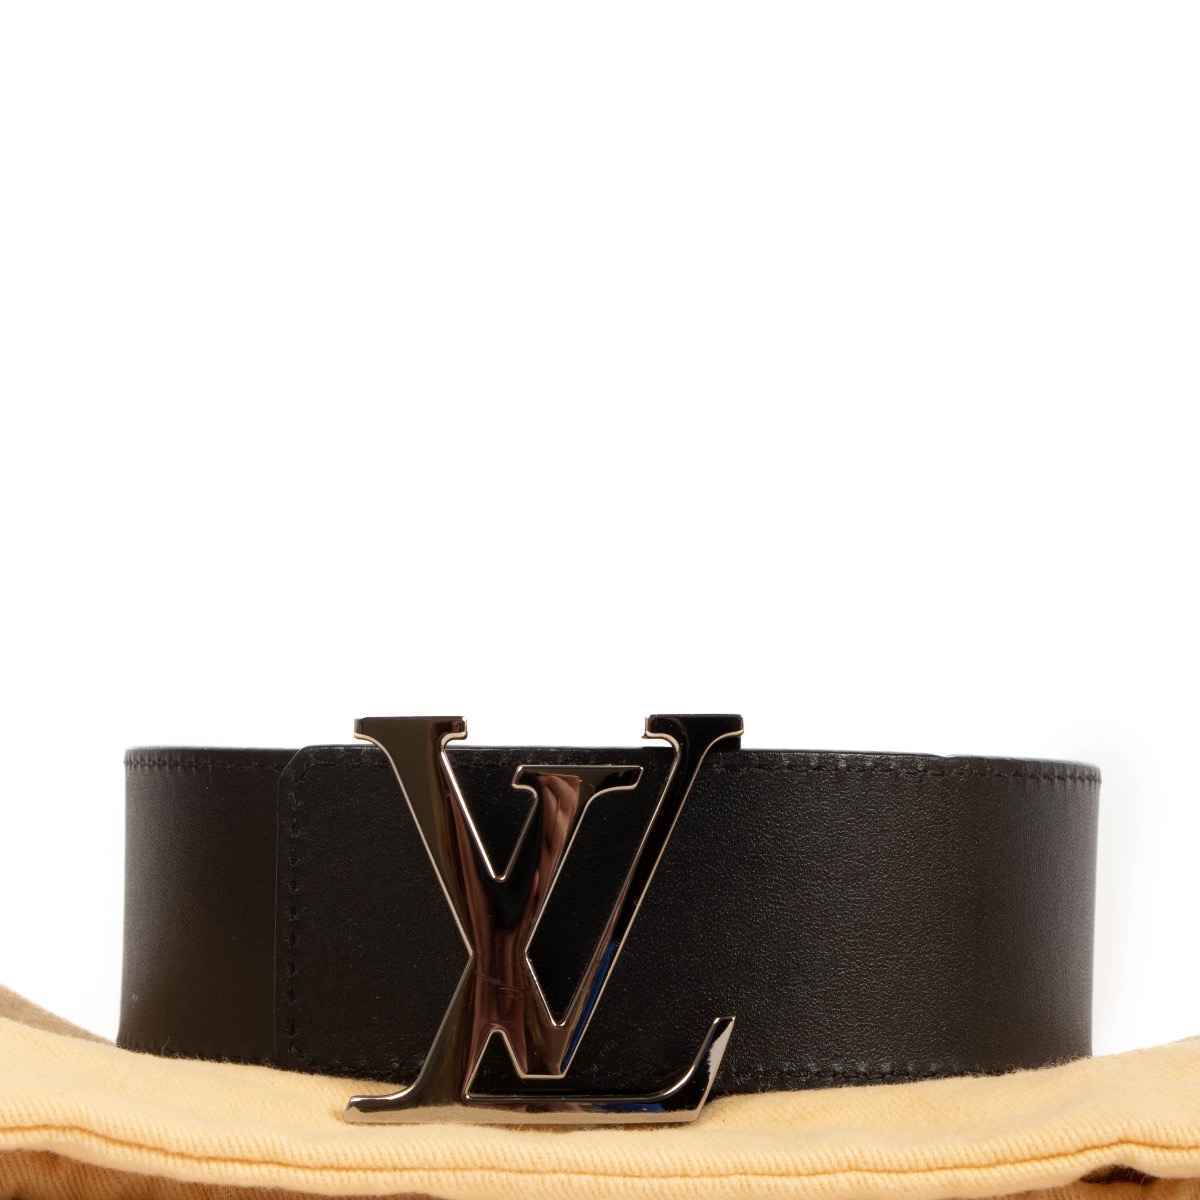 Lv circle leather belt Louis Vuitton Black size 100 cm in Leather - 29038772